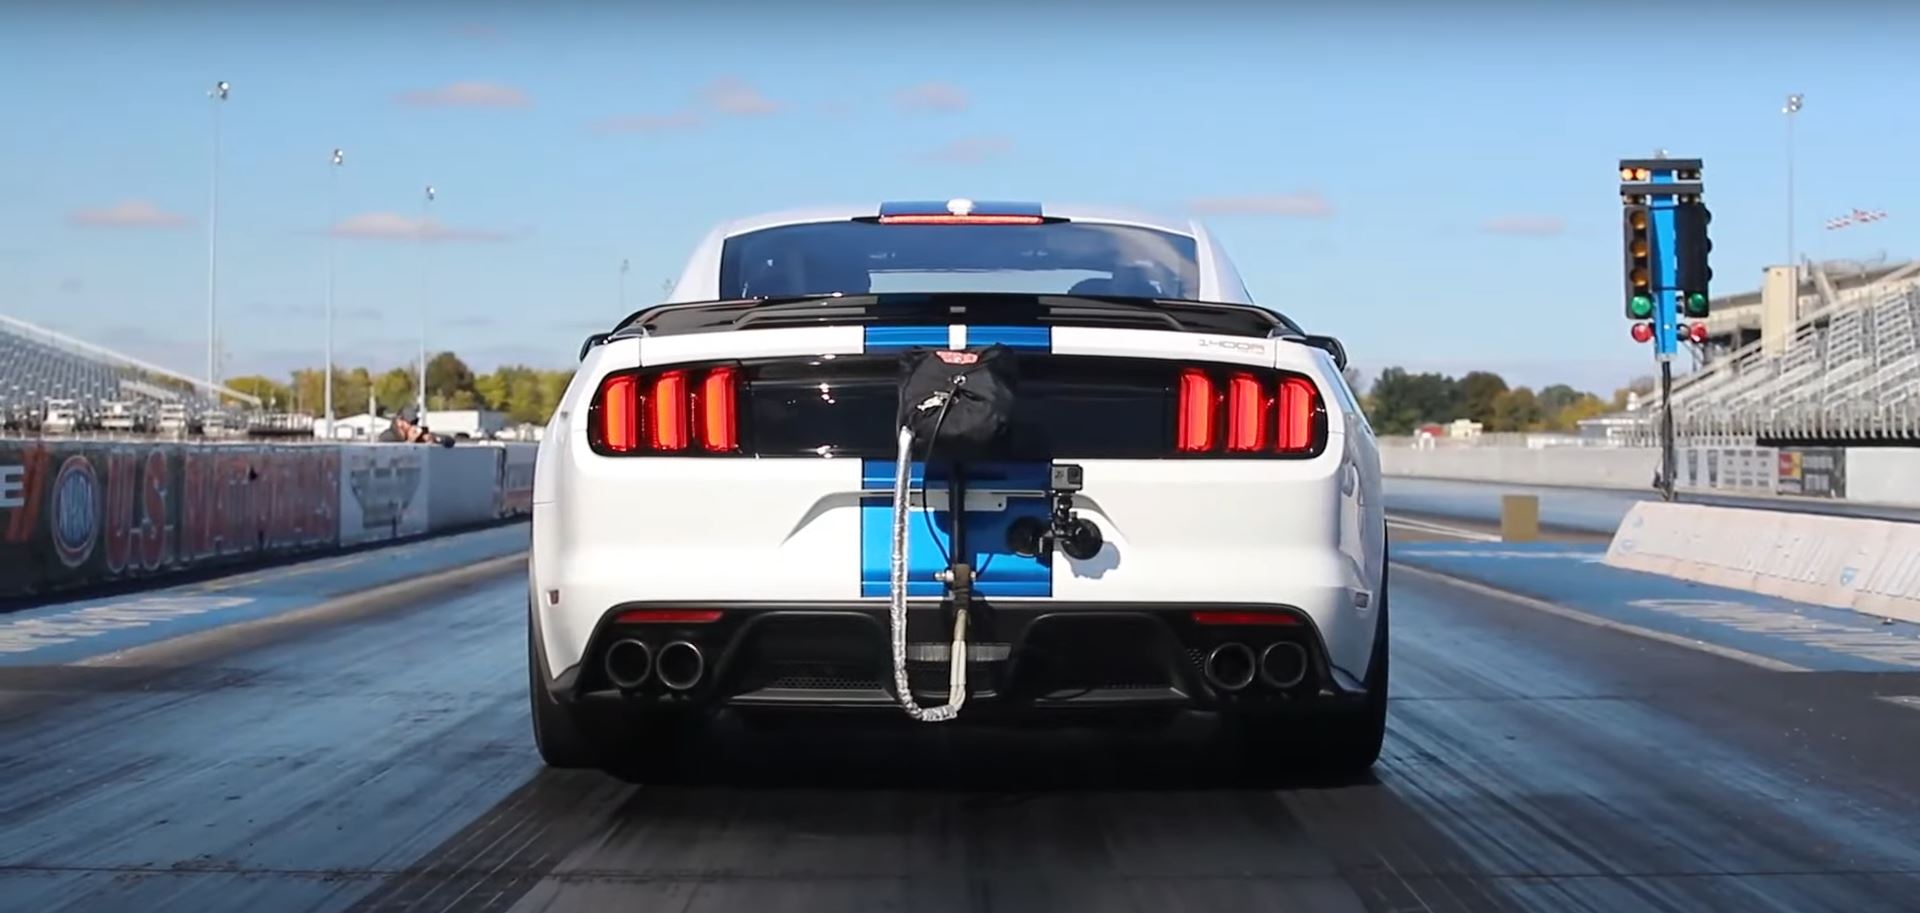 Twin Turbo Shelby Gt350 Sets New World Record Hold On To Your Seat